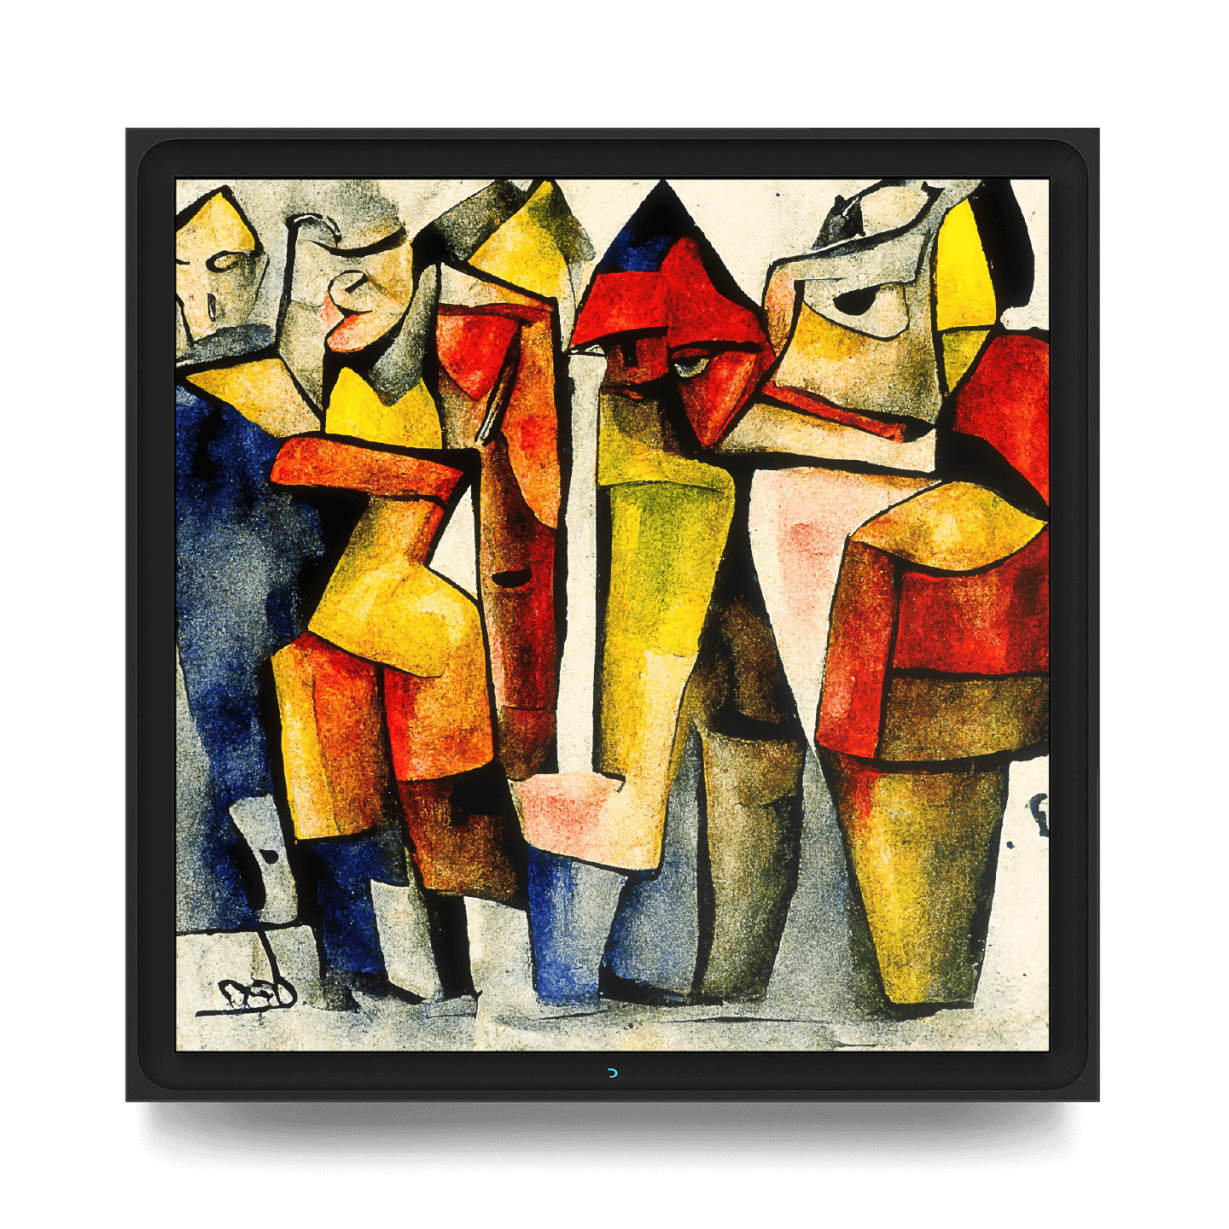 A black Danvas display hangs on a white gallery wall and features a figural painting by Helena Sarin, showing red, orange and blue figures composed of blocks and angles. 